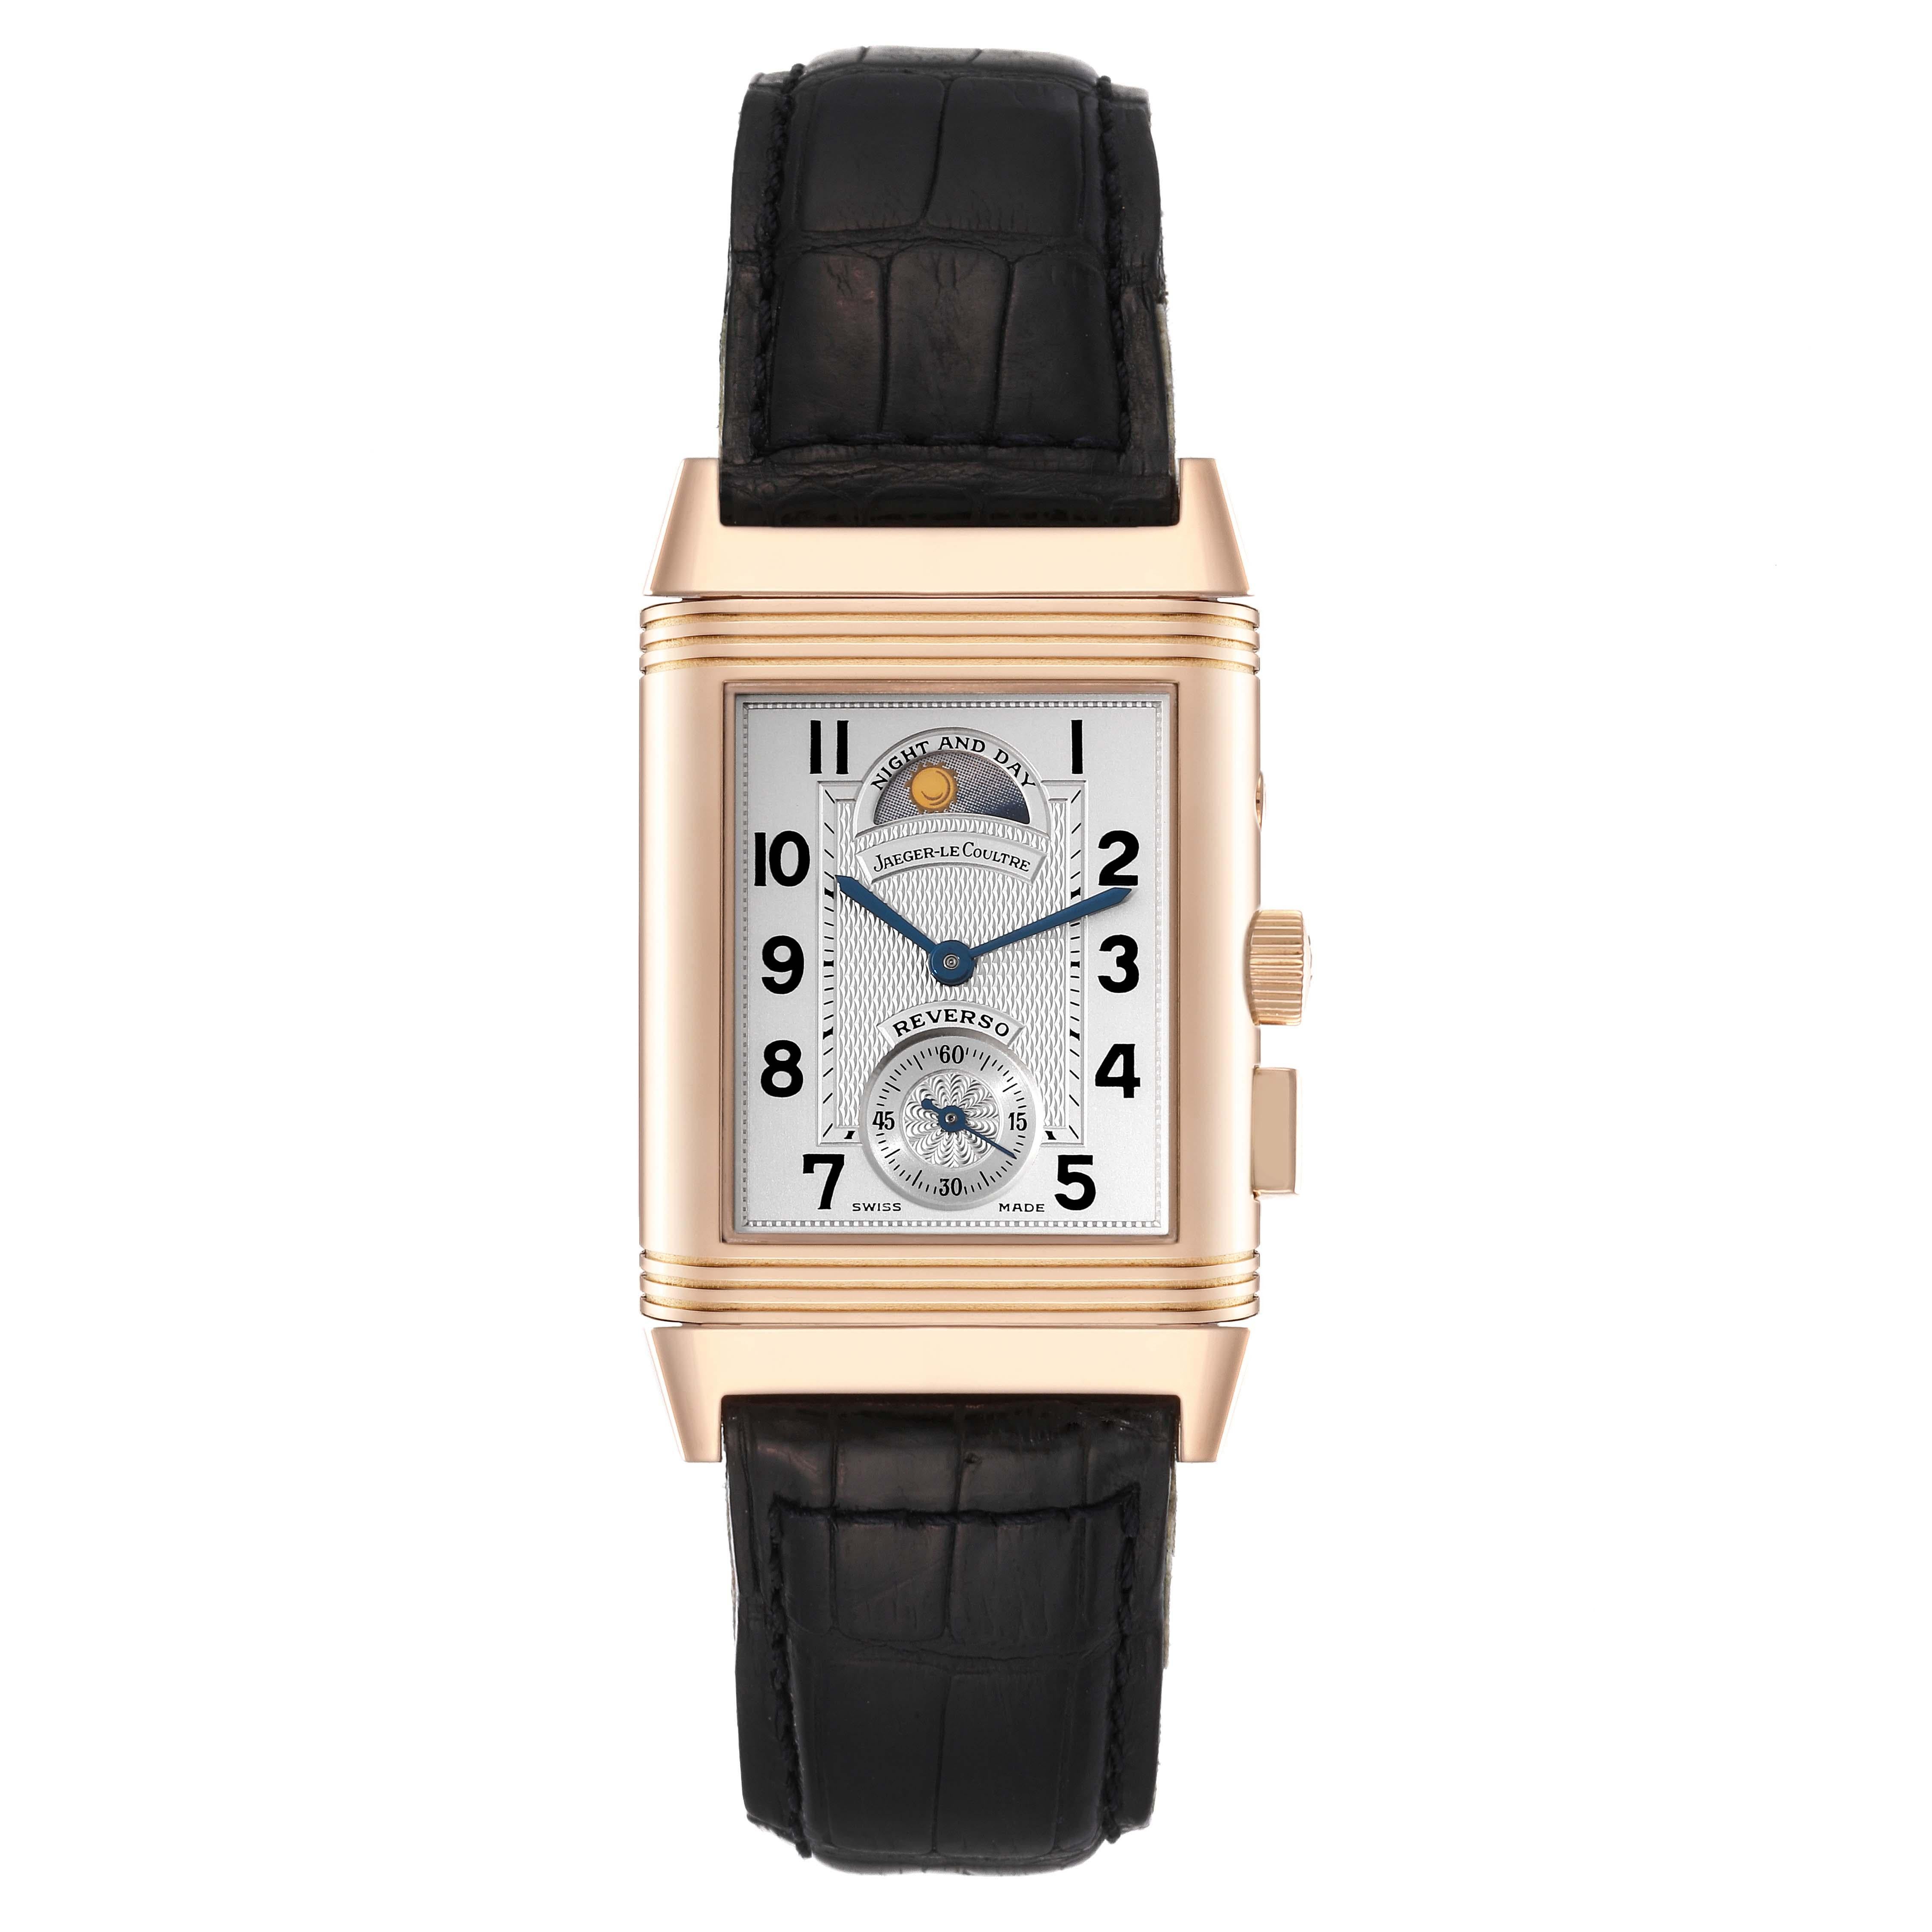 Jaeger LeCoultre Reverso Geographique LE Rose Gold Watch 270.2.582B Box Papers 1